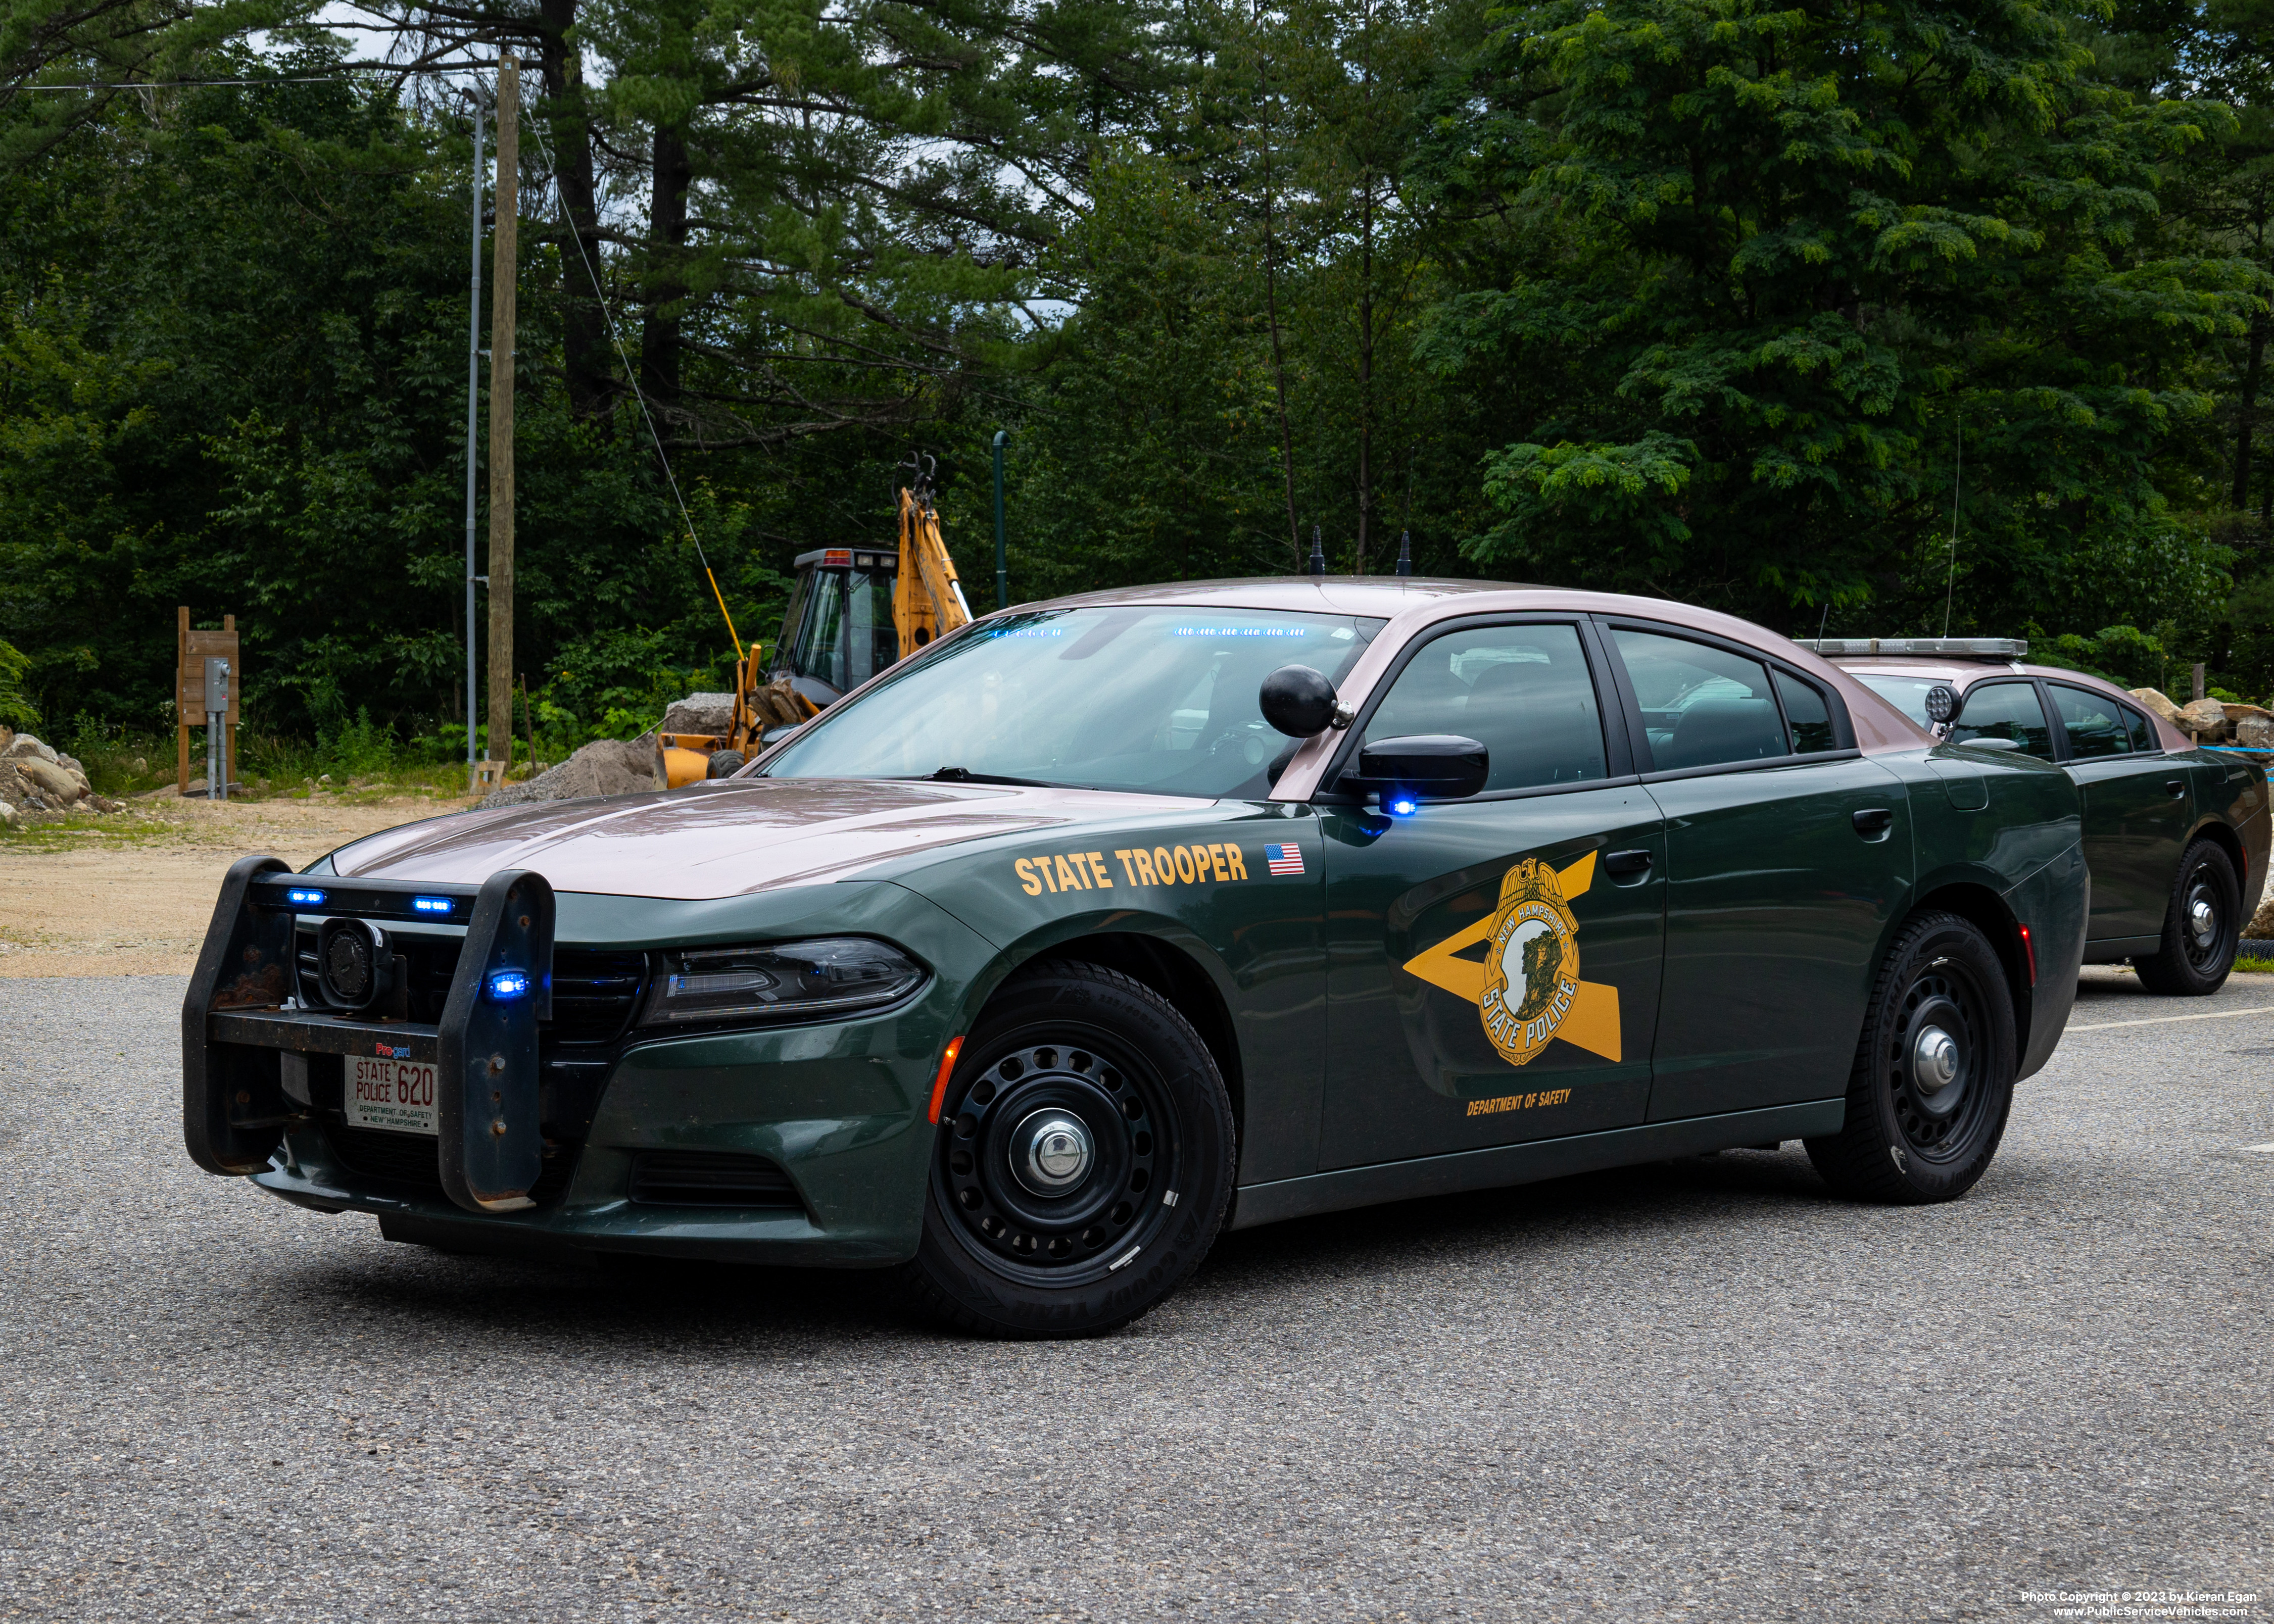 A photo  of New Hampshire State Police
            Cruiser 620, a 2017-2019 Dodge Charger             taken by Kieran Egan